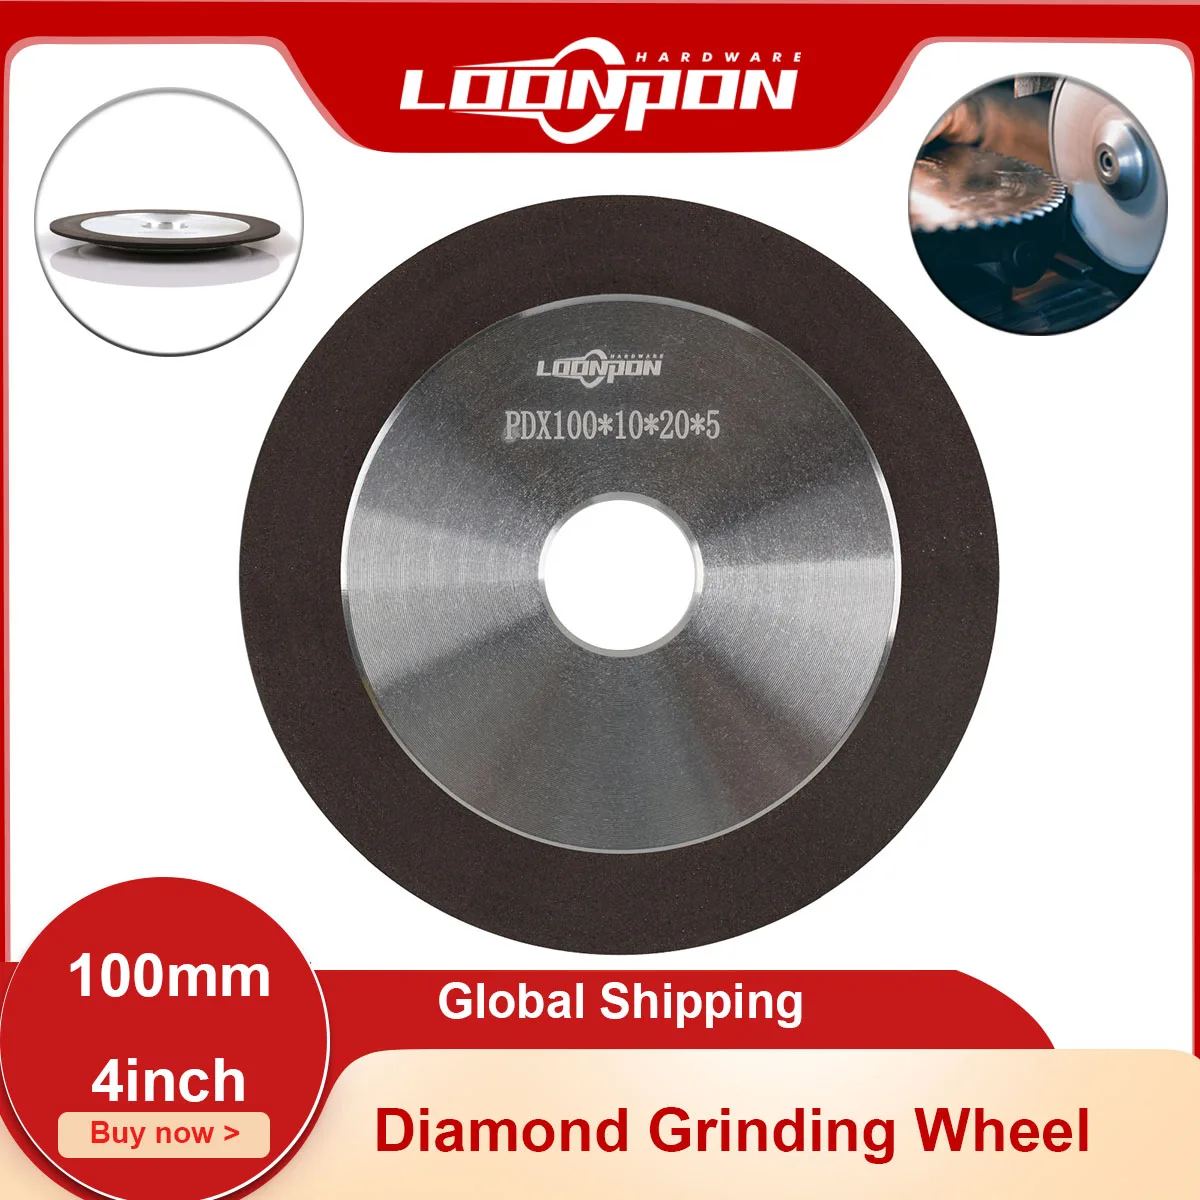 100mm/4inch Diamond Grinding Wheel Grinding Circle Grit 150 for Tungsten Steel Milling Cutter Tool Sharpener Grinder 1 pc diamond grinding wheel 50mm180 grit grinder sharpener trimming rotary tool multifunctional drill bit grinding machine